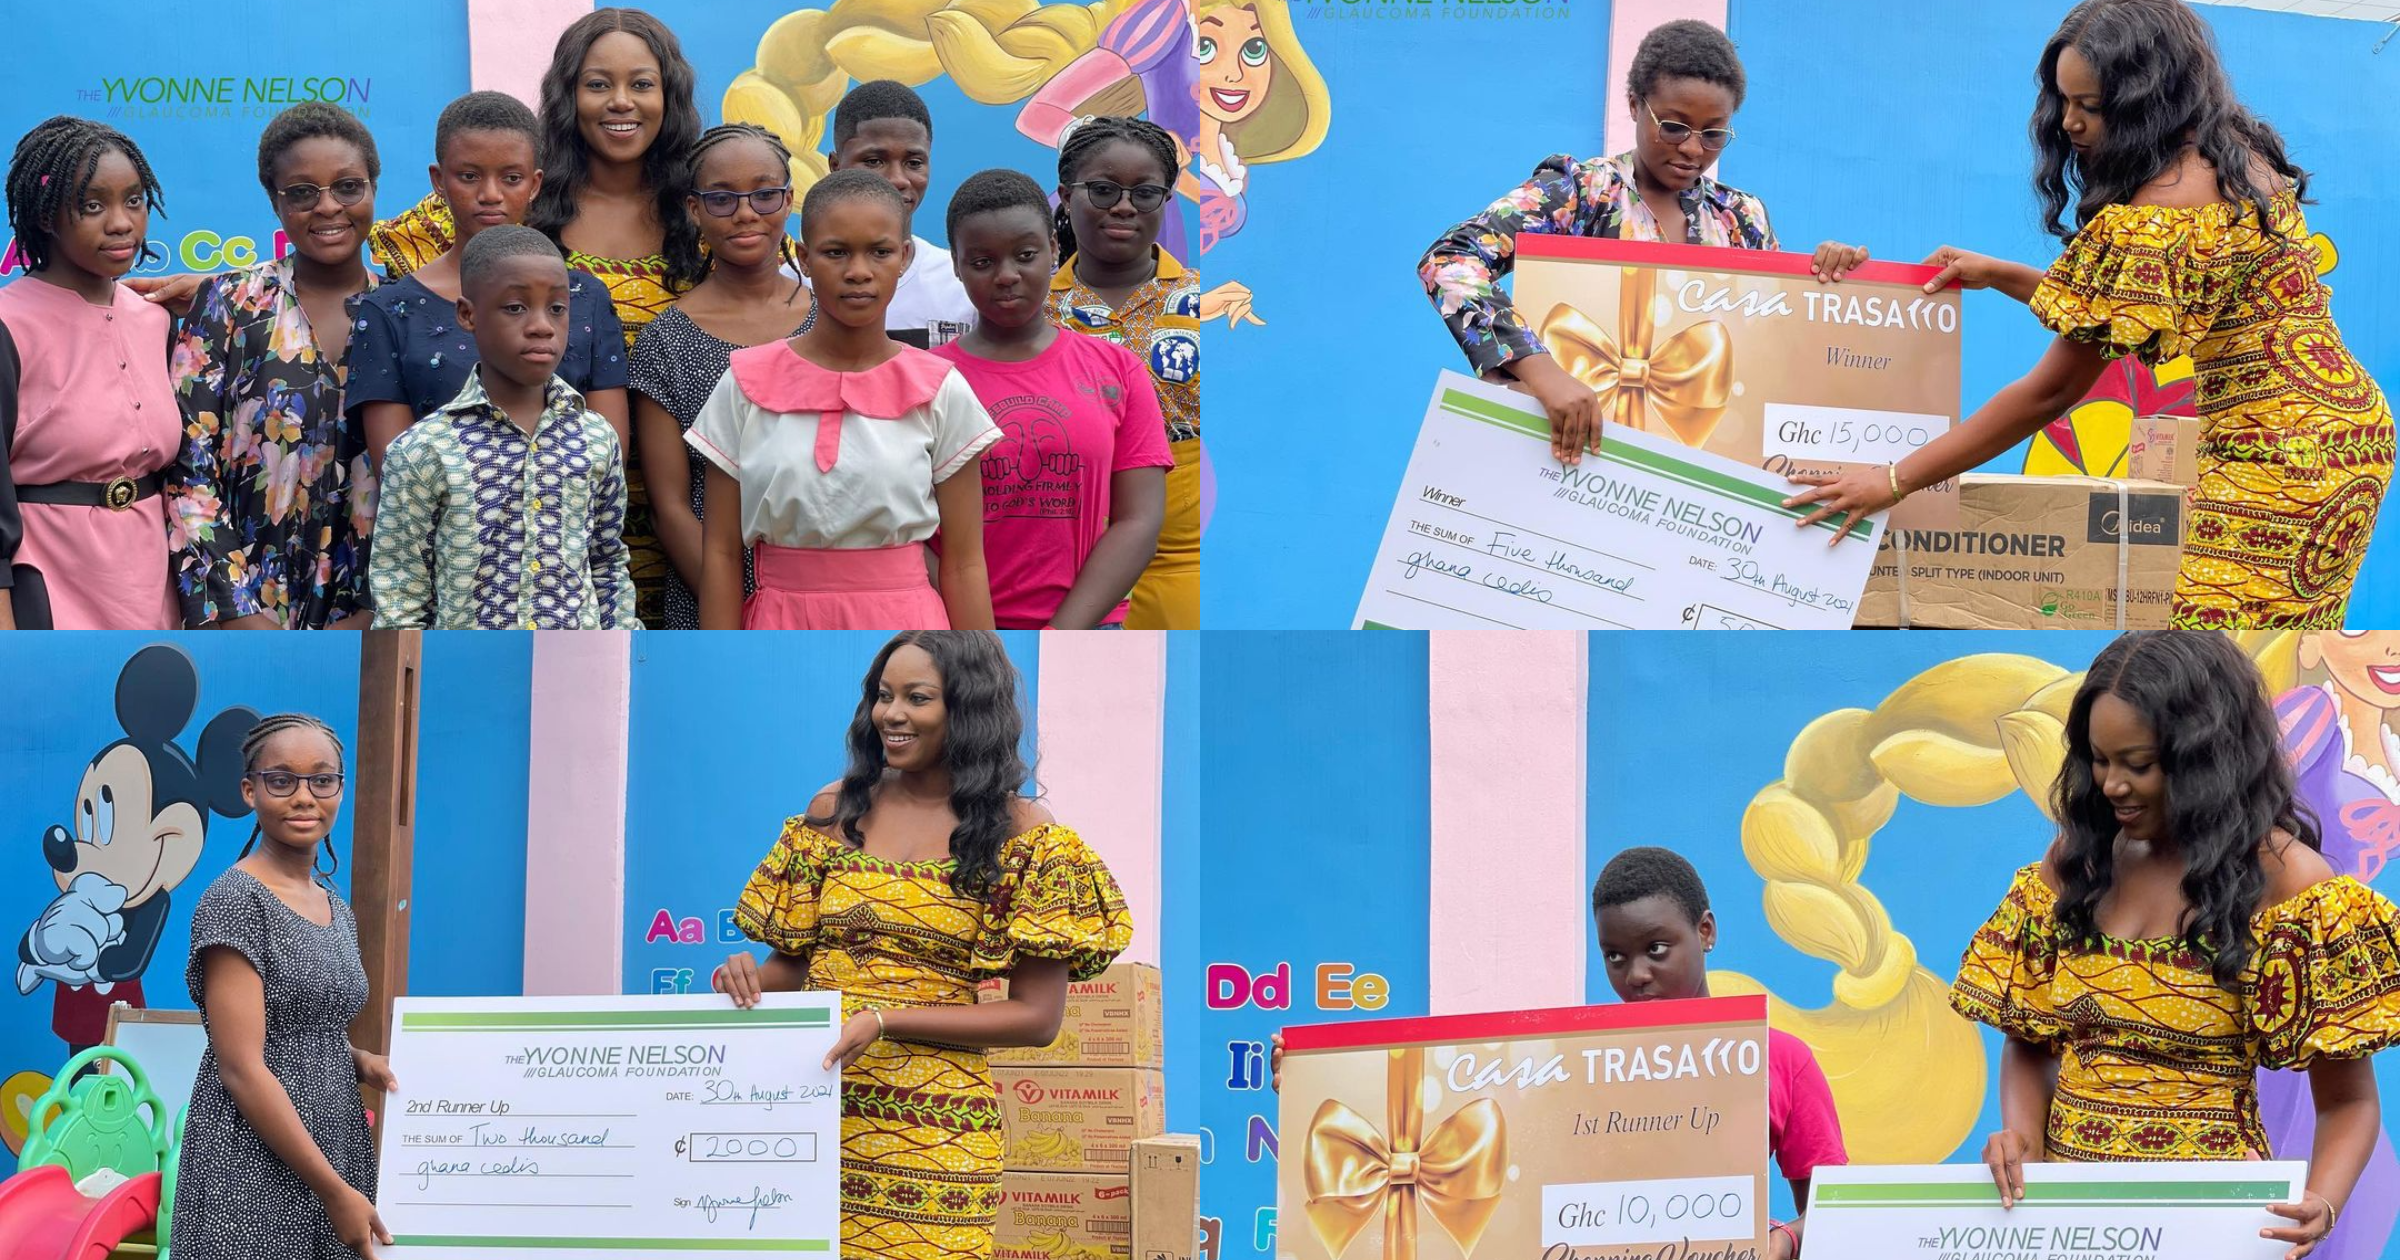 Yvonne Nelson presents prizes to winners